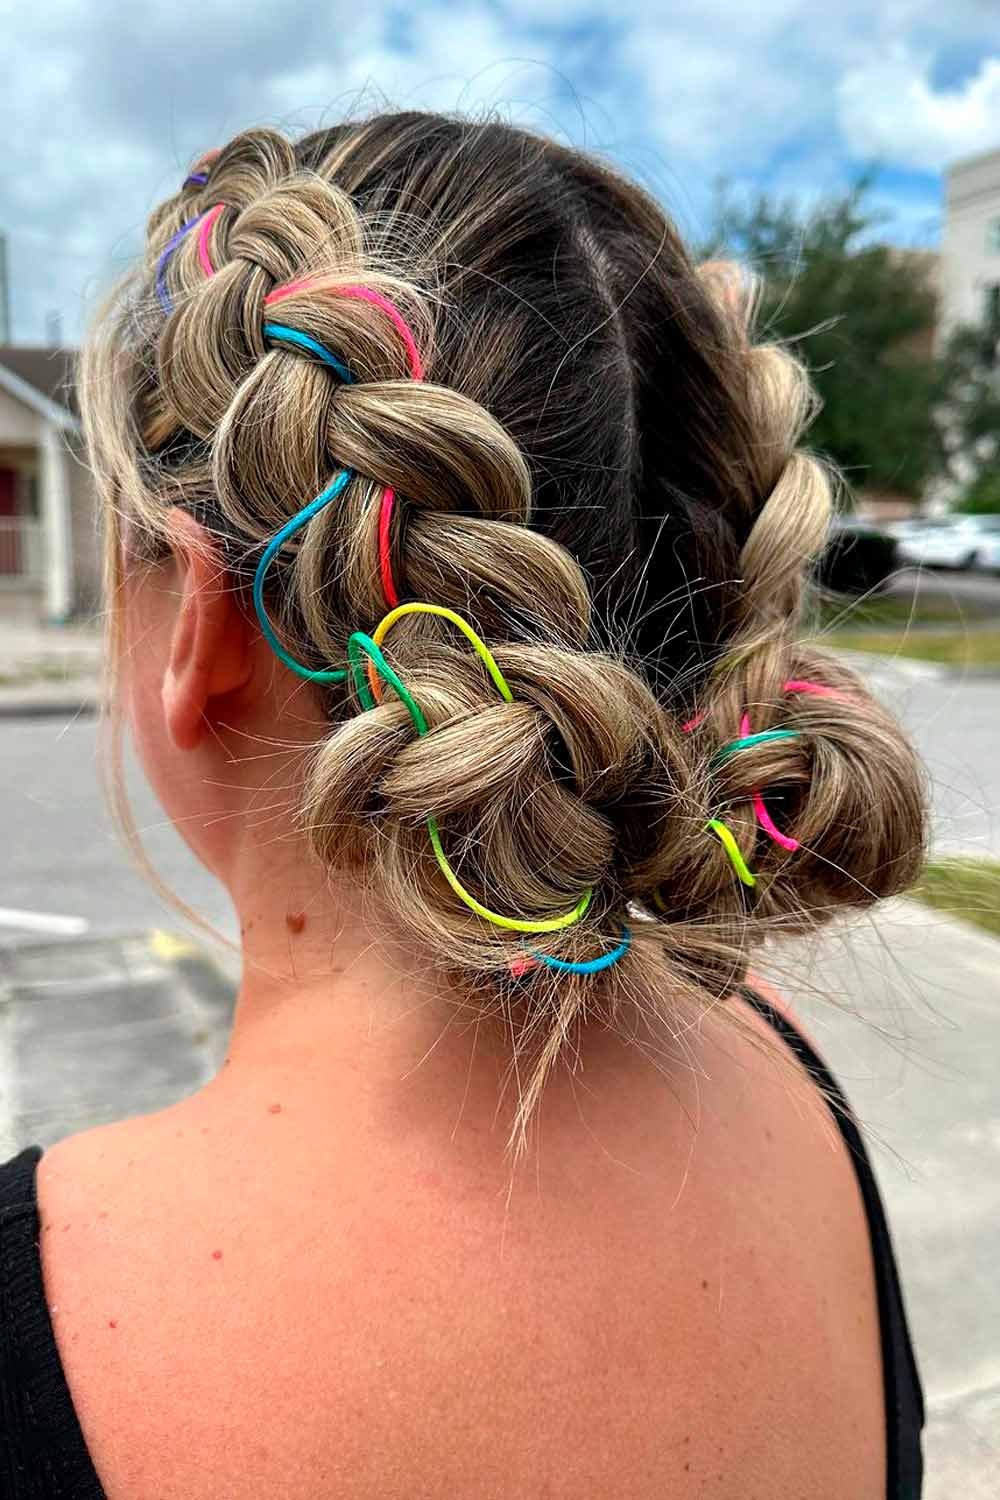 Braided Hairstyles with Colorful Rubber Bands #braidedhairstyles #braids